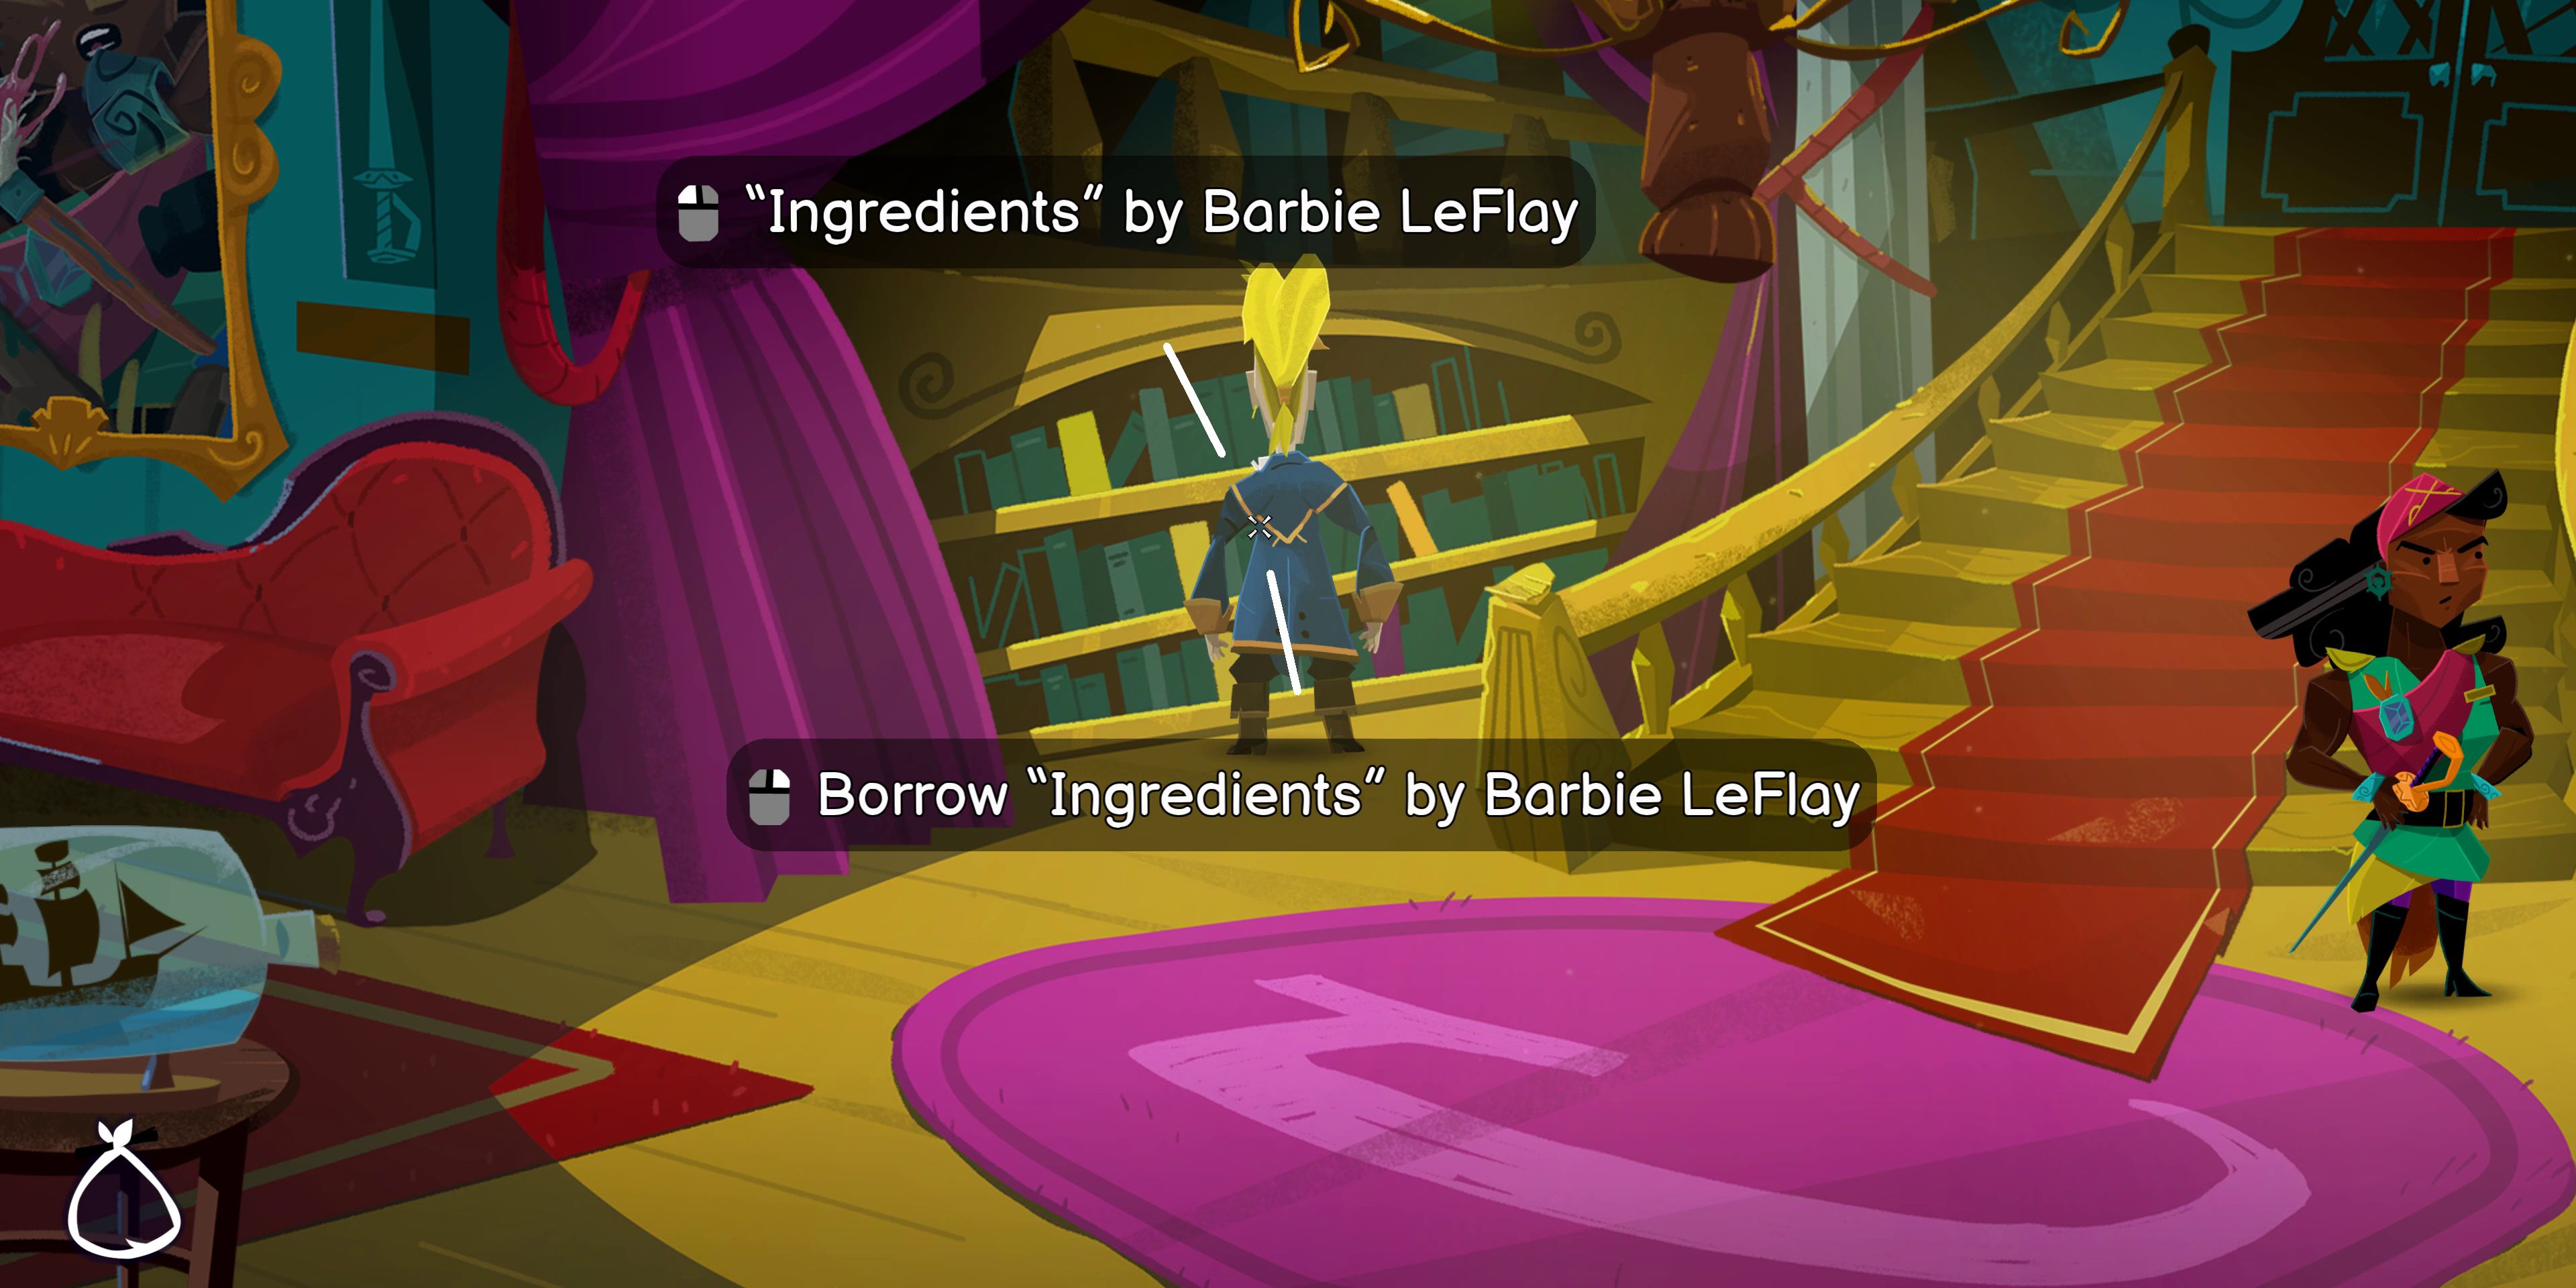 return-to-monkey-island-how-to-get-a-mop-05-ingredients-book